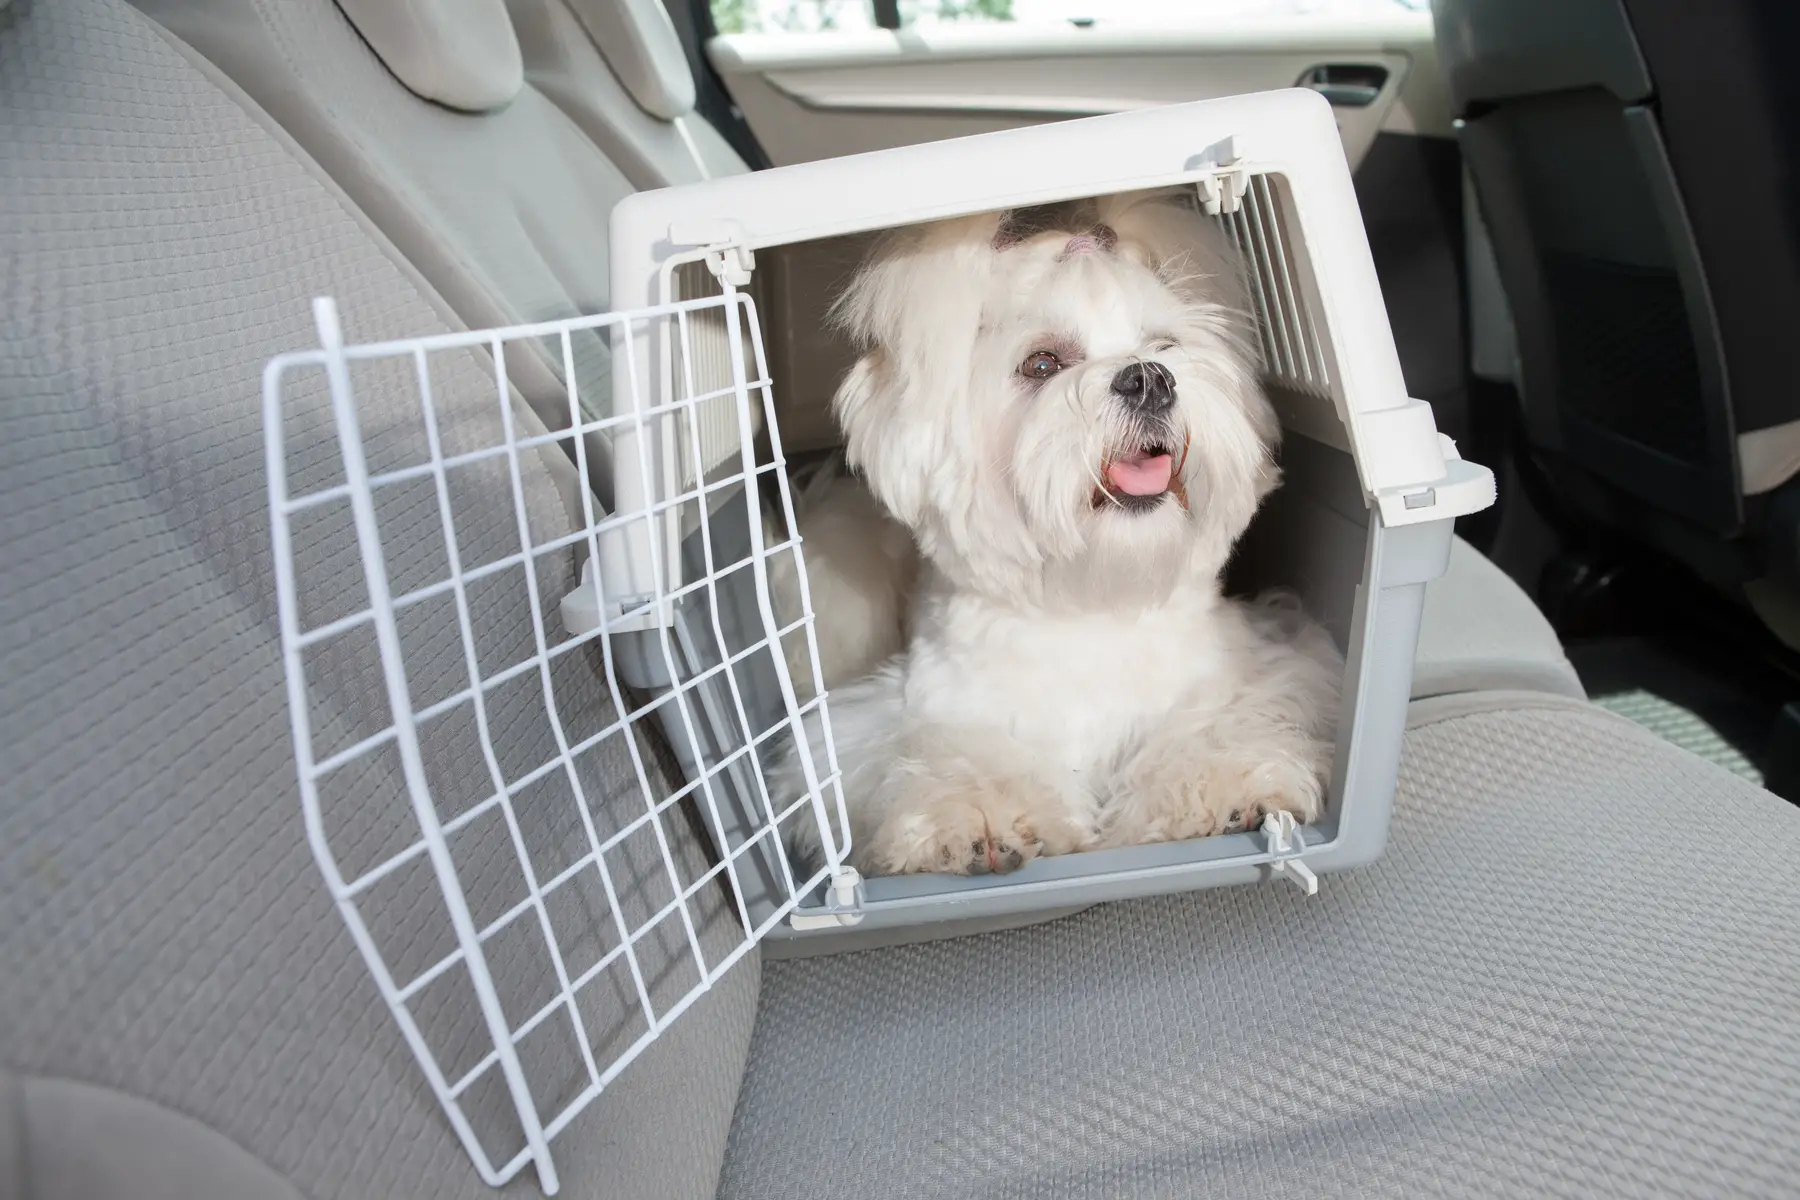 Transporting a small dog in a crate